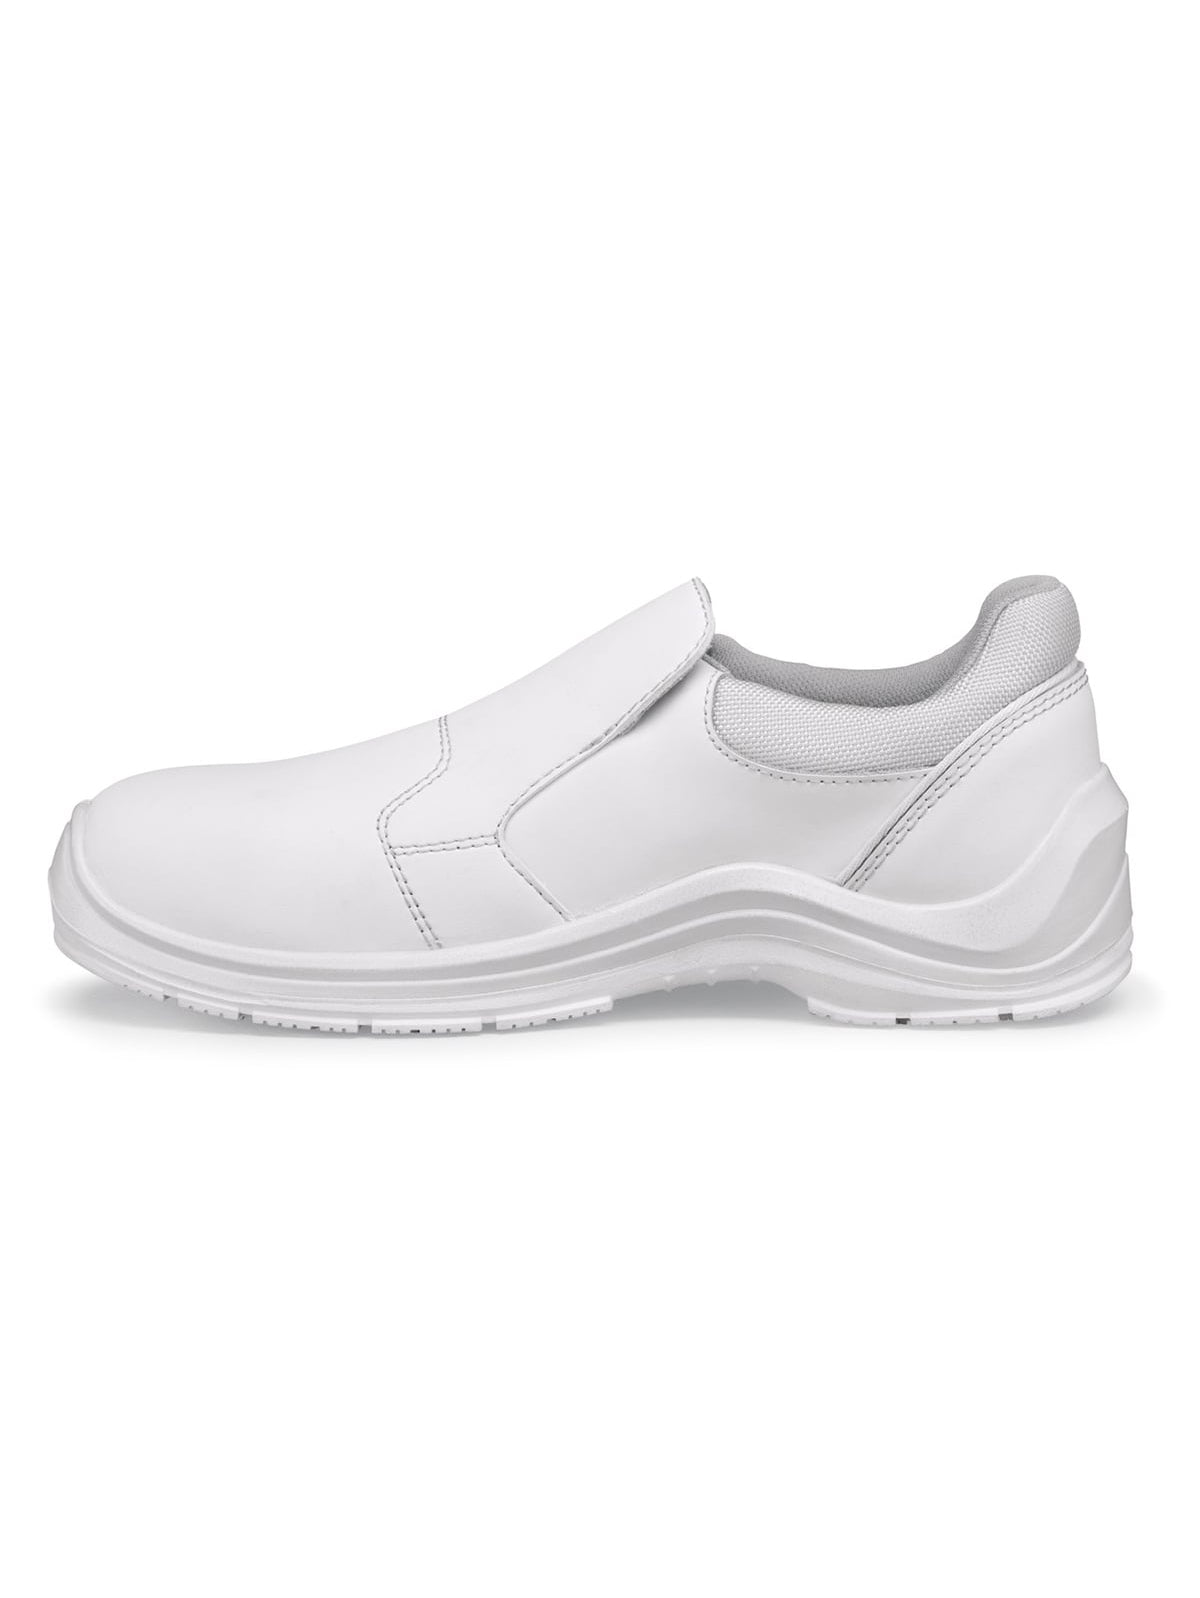 Unisex Work Shoe Gusto81 White (S3) by  Safety Jogger.